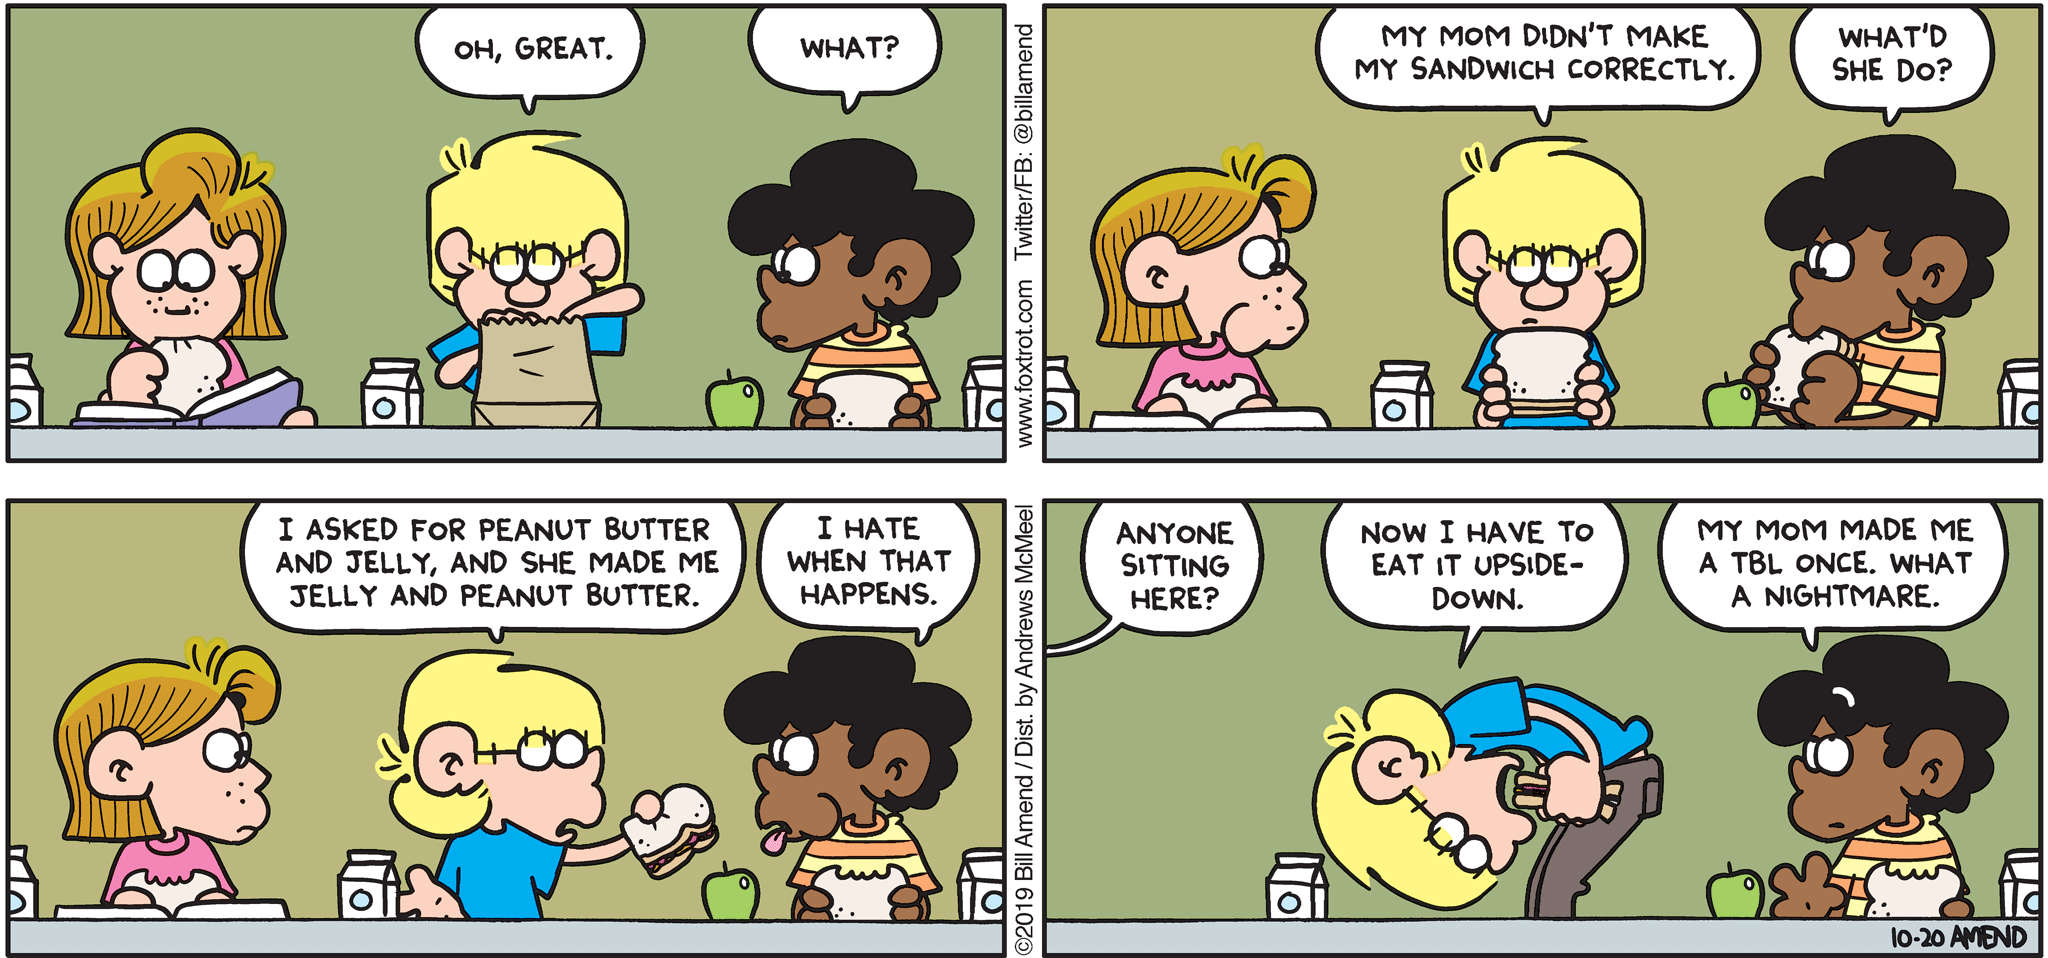 FoxTrot by Bill Amend - "J&PB" published October 20, 2019 - Jason: Oh, great. Marcus: What? Jason: My mom didn't make my sandwich correctly. Marcus: What'd she do? Jason: I asked for peanut butter and jelly, and she made me a jelly and peanut butter. Marcus: I hate when that happens. Schoolmate: Anyone sitting here? Jason: Now I have to eat it upside-down. Marcus: My mom made me a TBL once. What a nightmare.